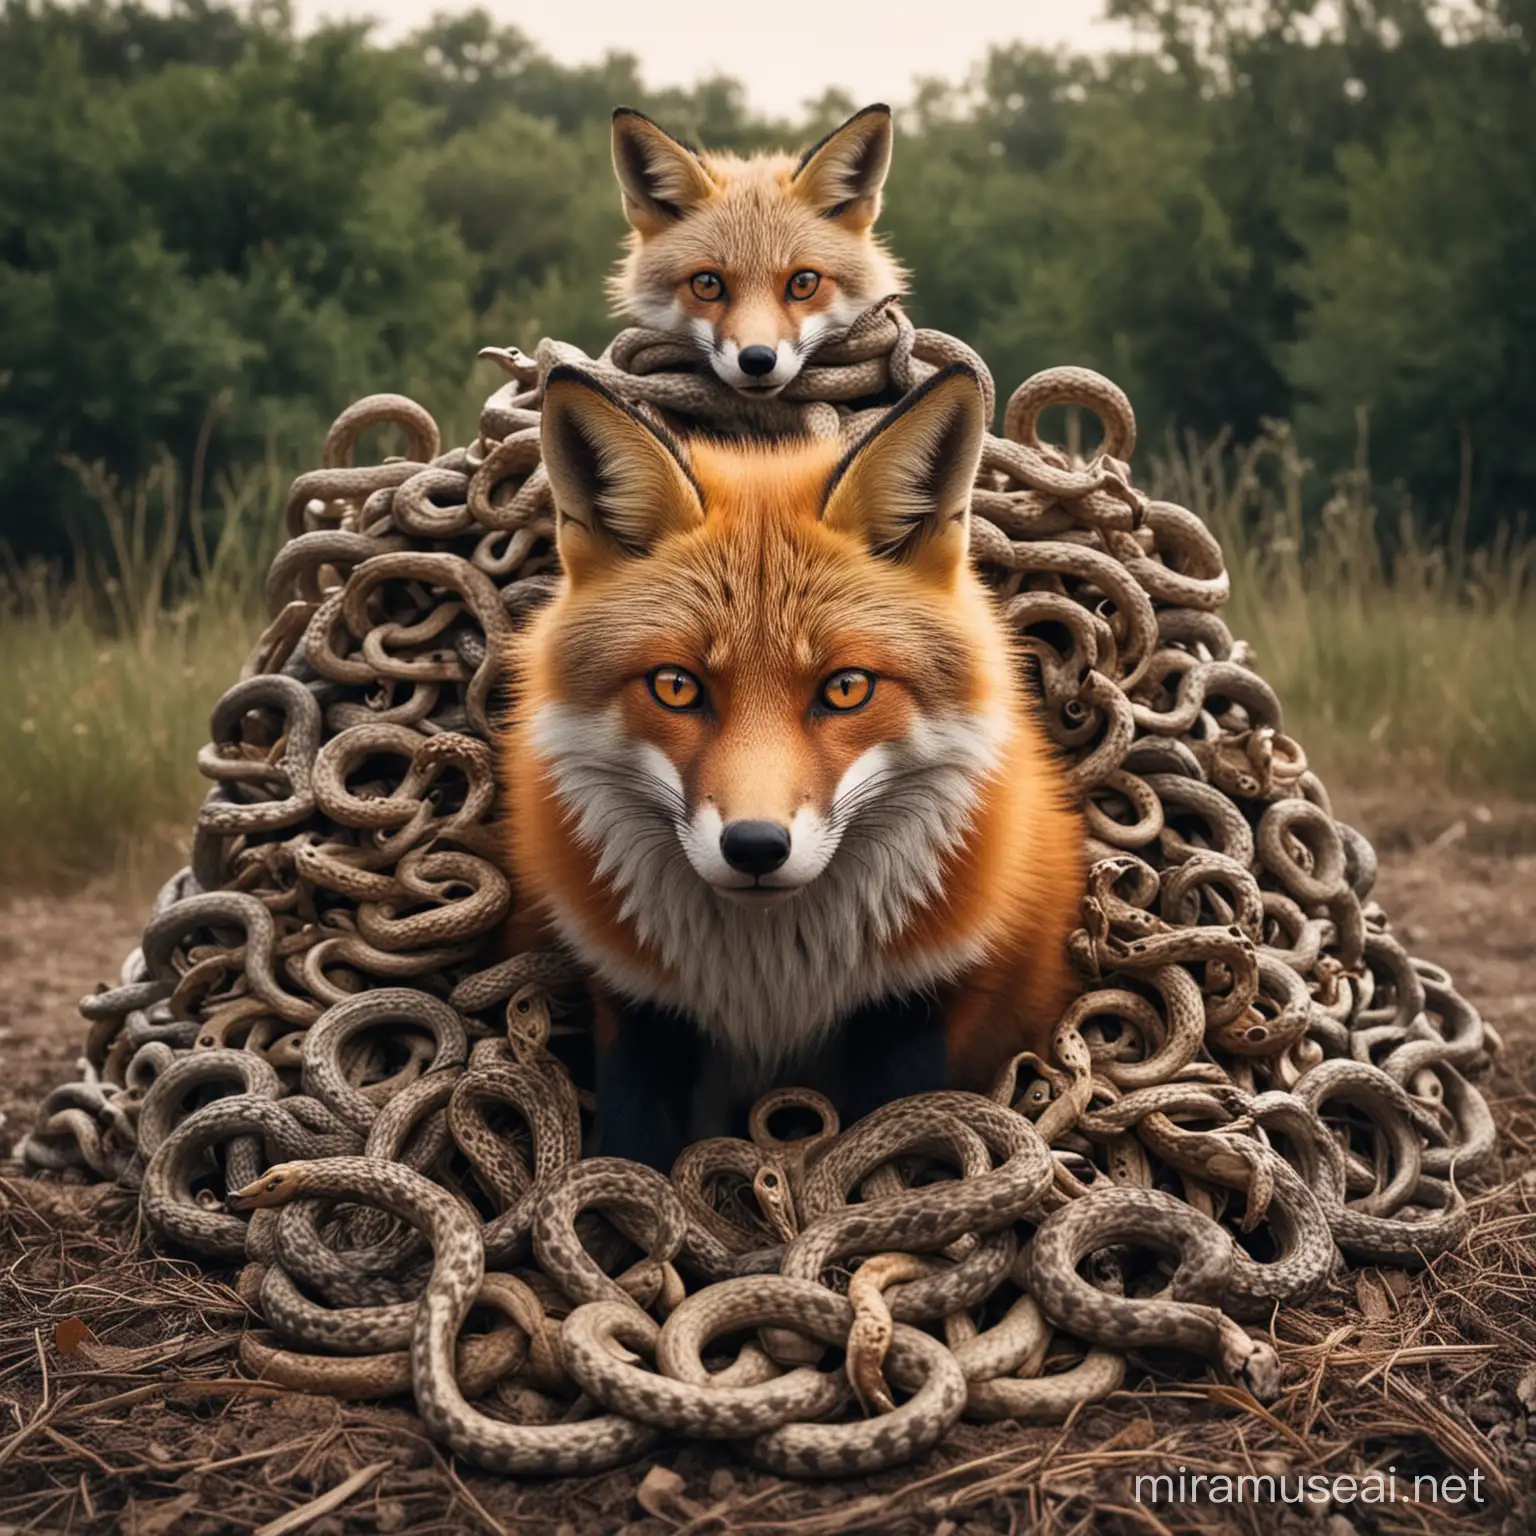 A fox with skull shaped eyes, sitting ontop of a pile of snakes